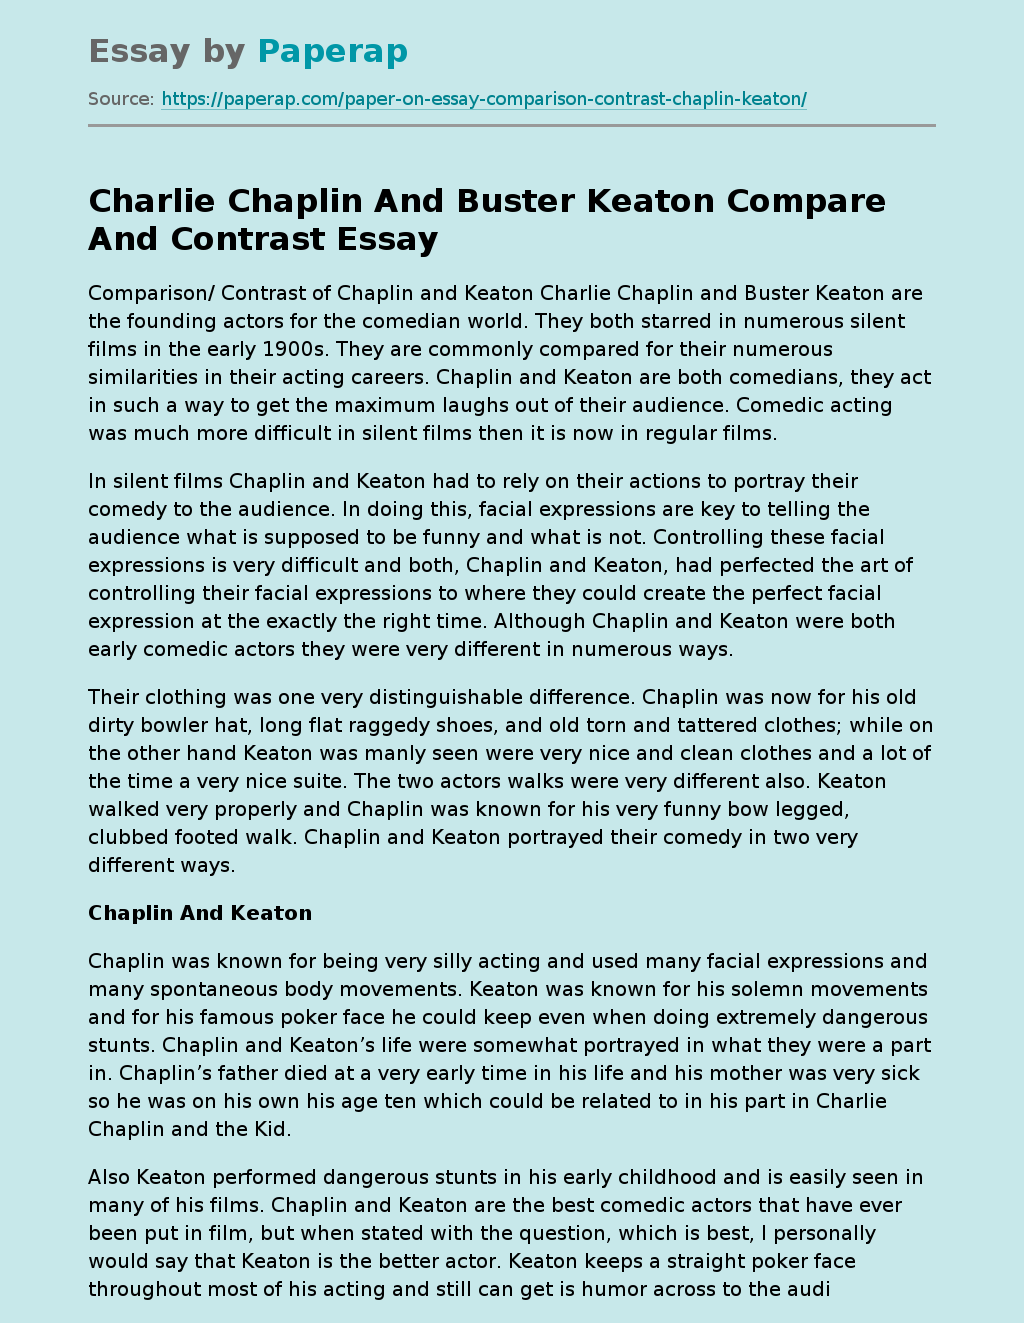 Charlie Chaplin And Buster Keaton Compare And Contrast